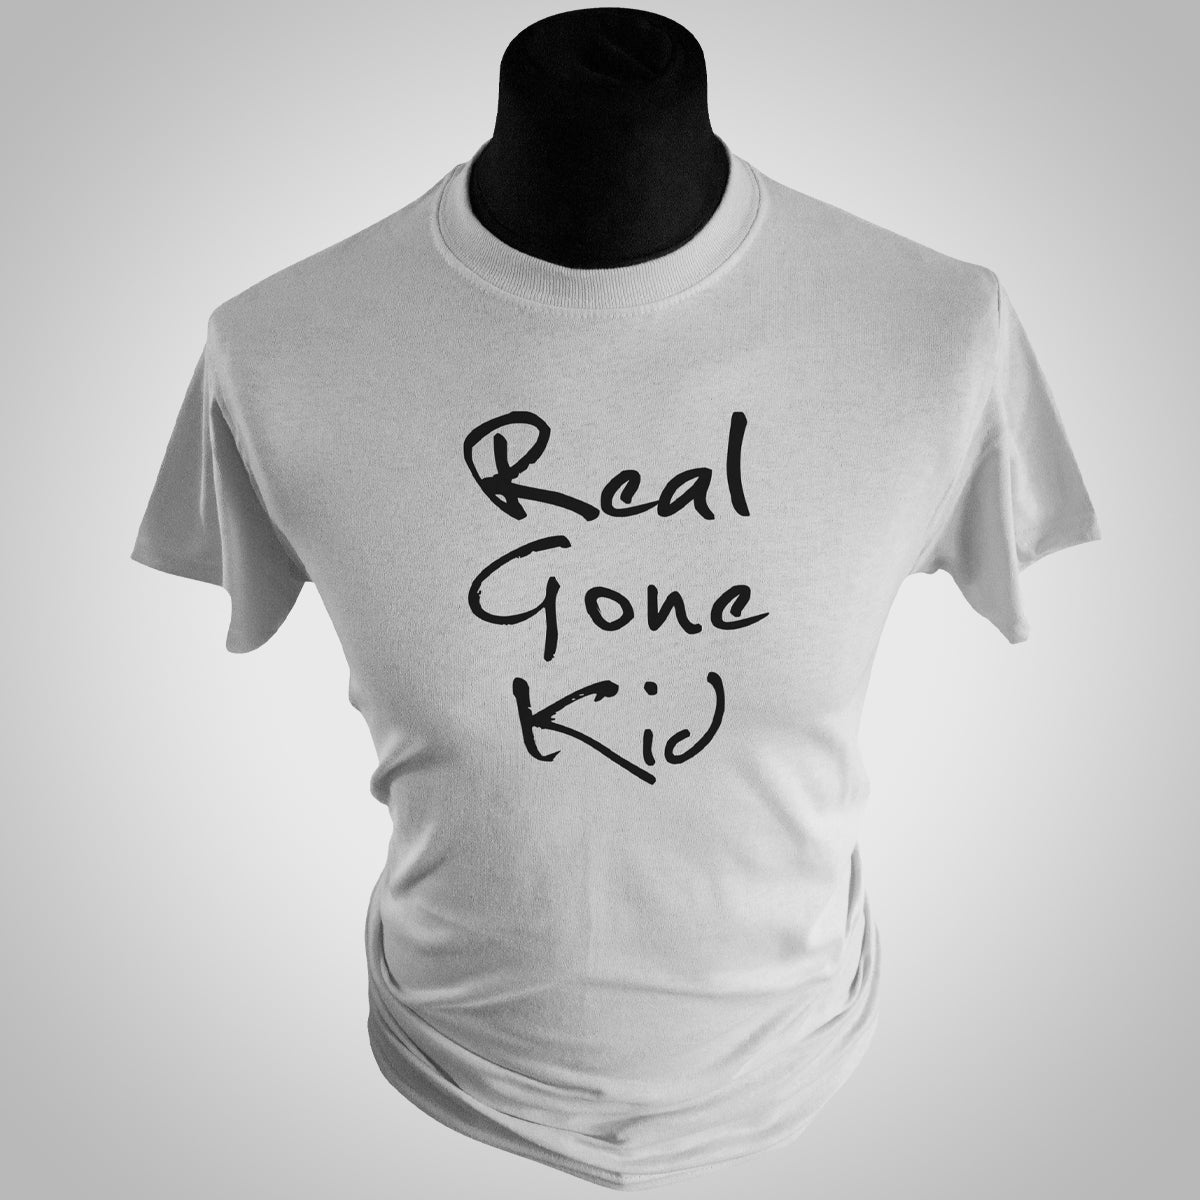 Real Gone Kid T Shirt